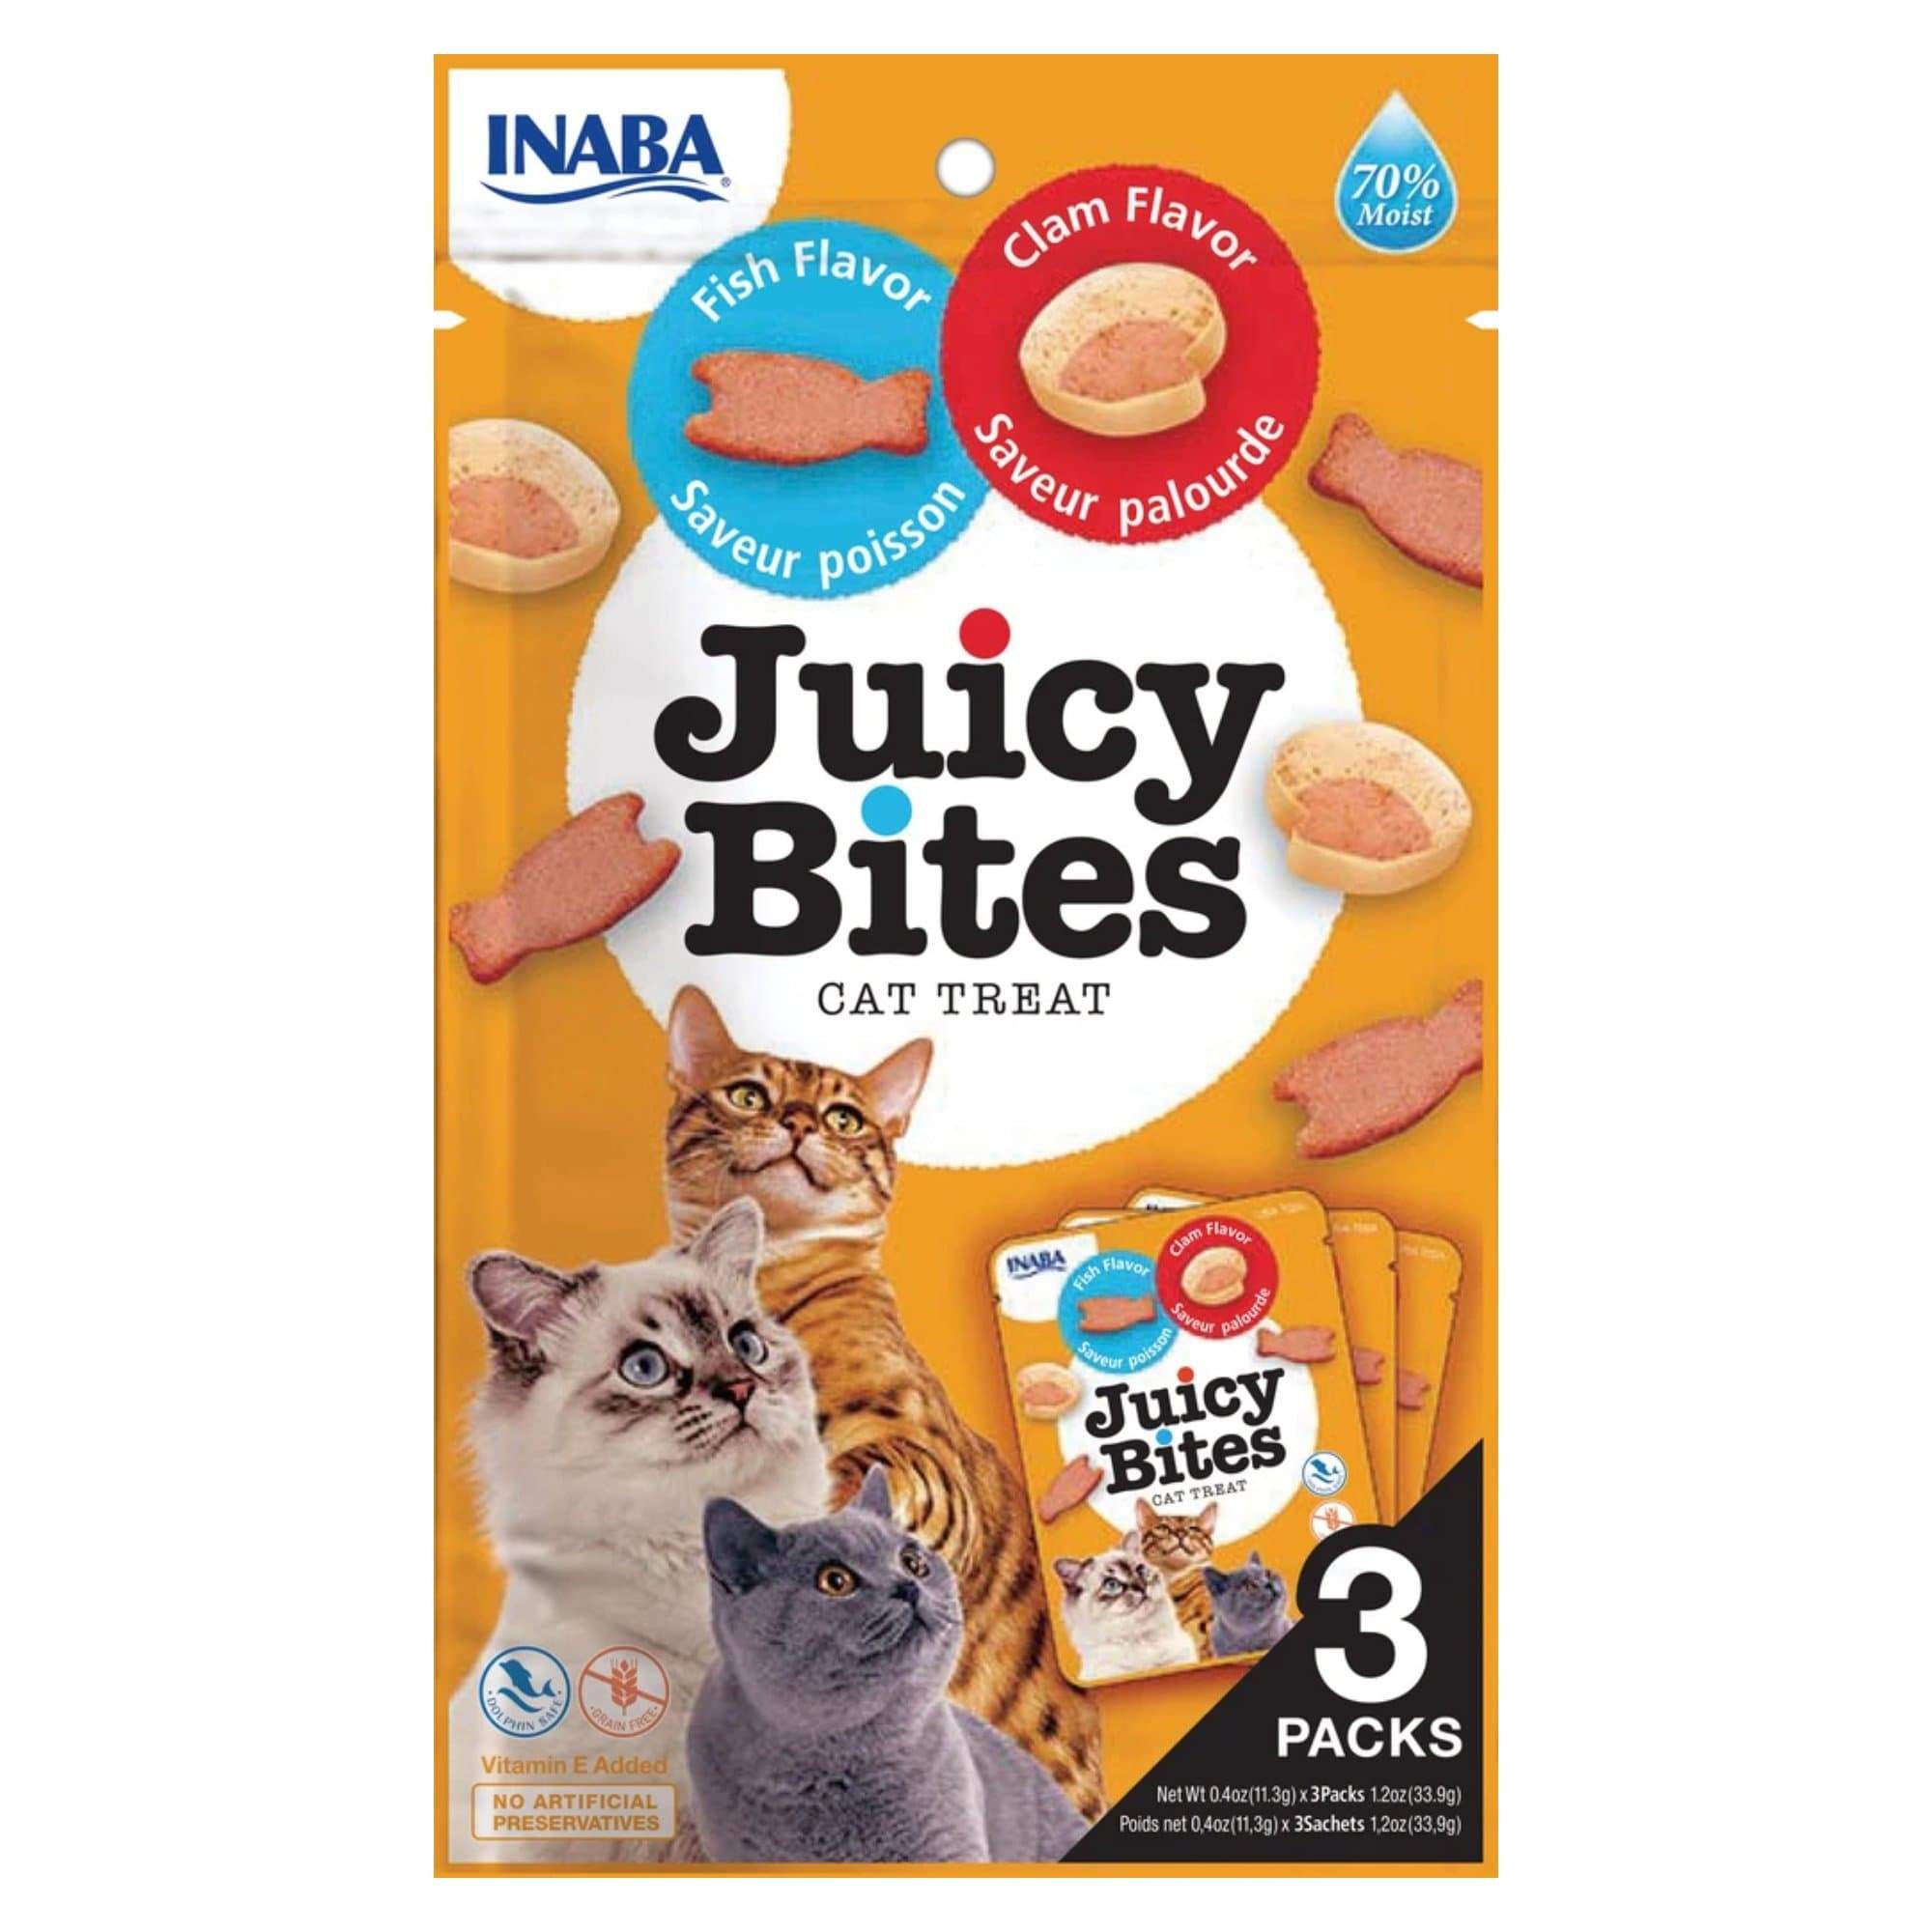 INABA Juicy Bites Fish & Clam Flavor 33.9g /3 pouches per pack